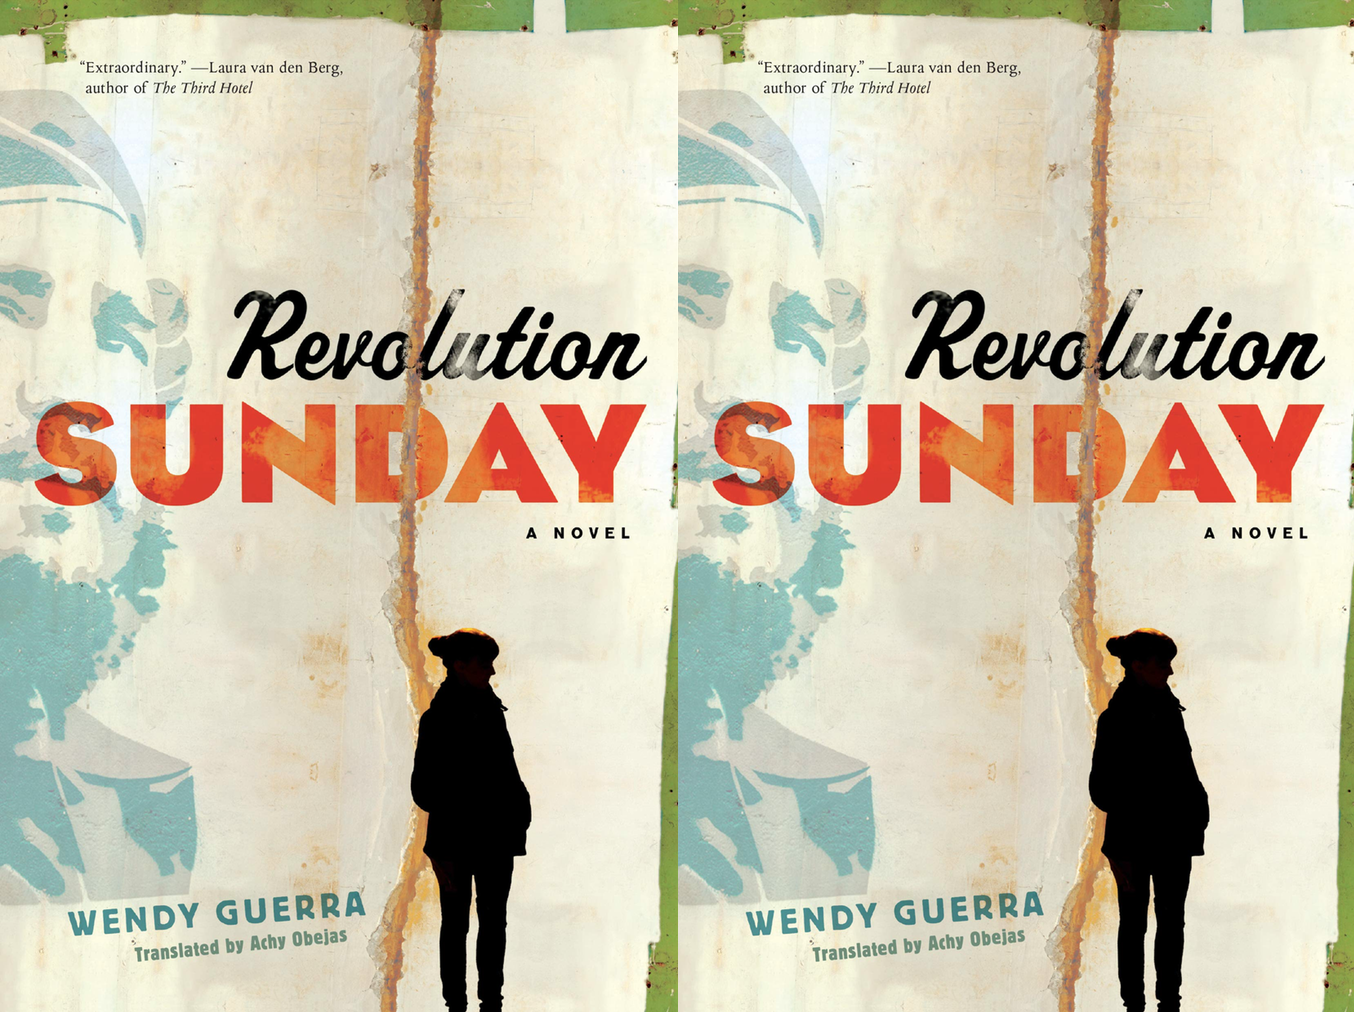 Cover art for Revolution Sunday by Wendy Guerra